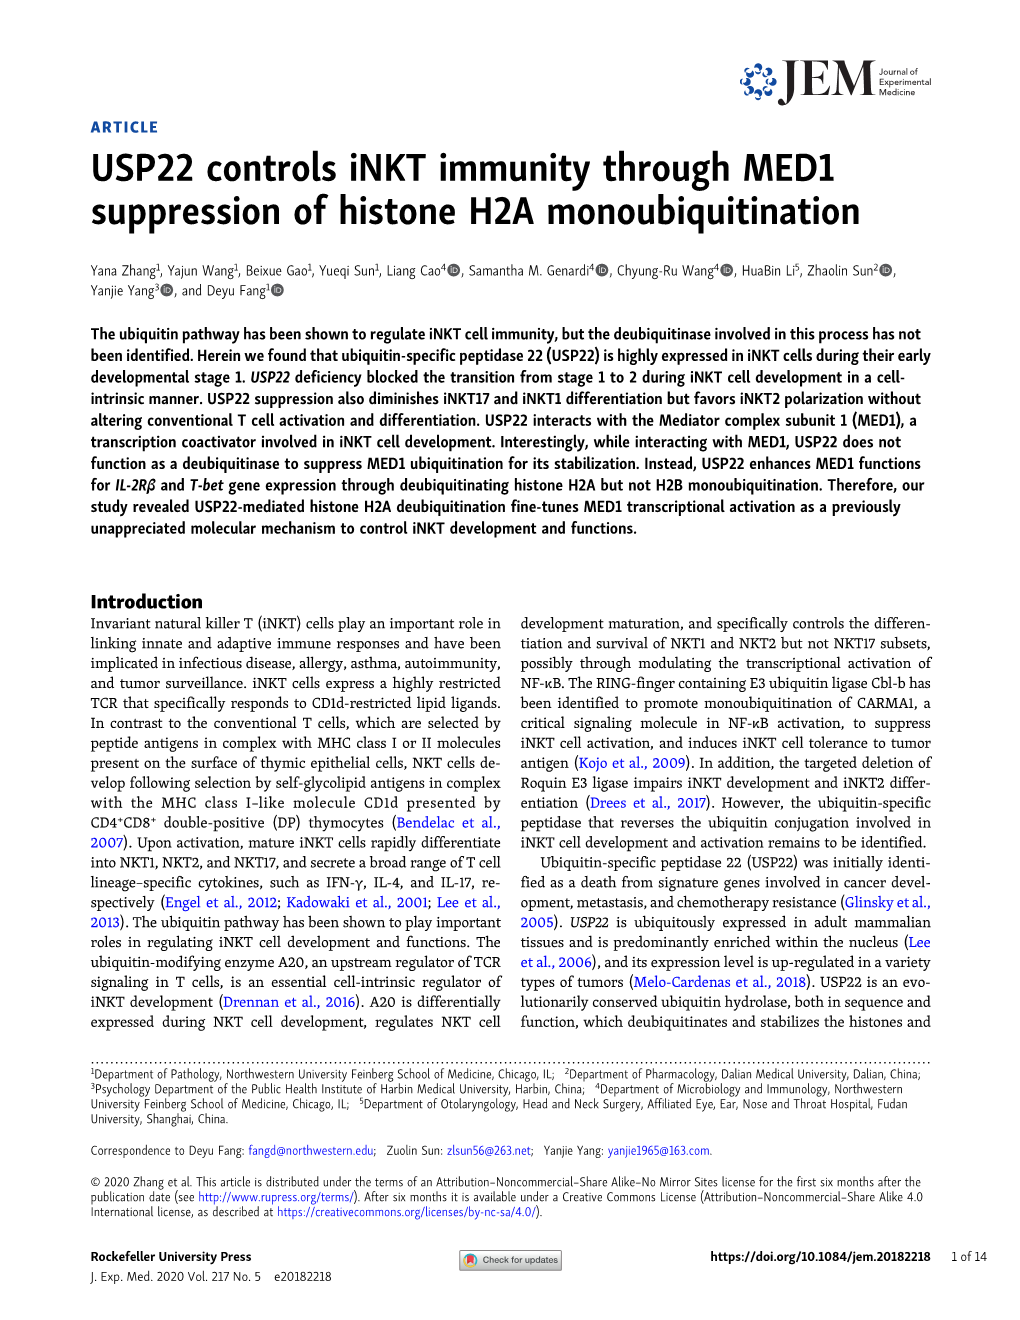 USP22 Controls Inkt Immunity Through MED1 Suppression of Histone H2A Monoubiquitination